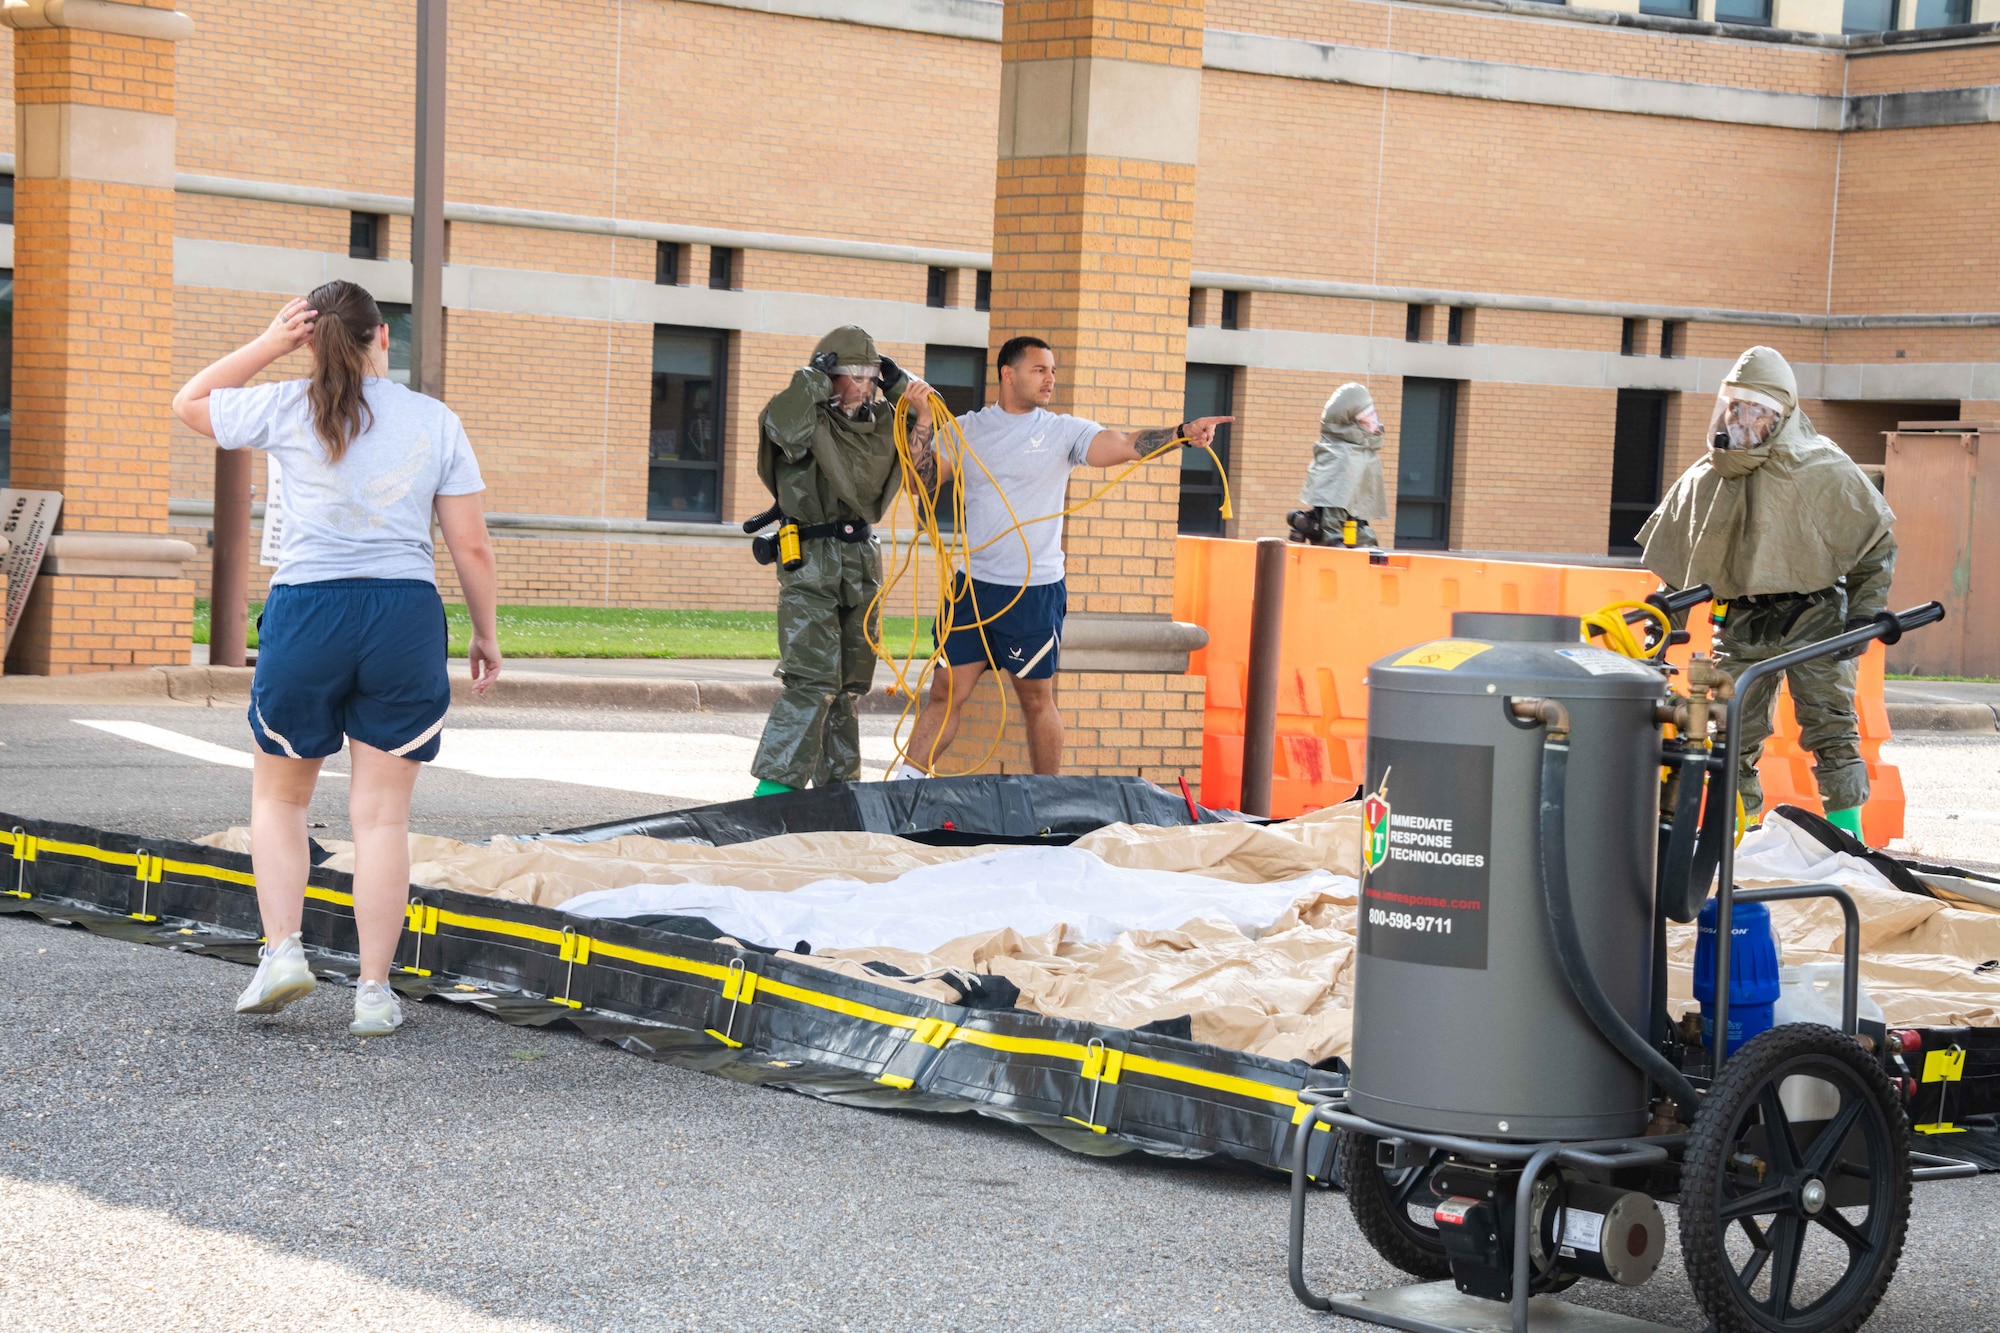 In-Place Patient Decontamination Team members begin set-up of shelter to perform patient decontamination for patients that arrive for treatment. The training aims to improve teamwork, response abilities, and Installation Medical All Hazards Response capability.